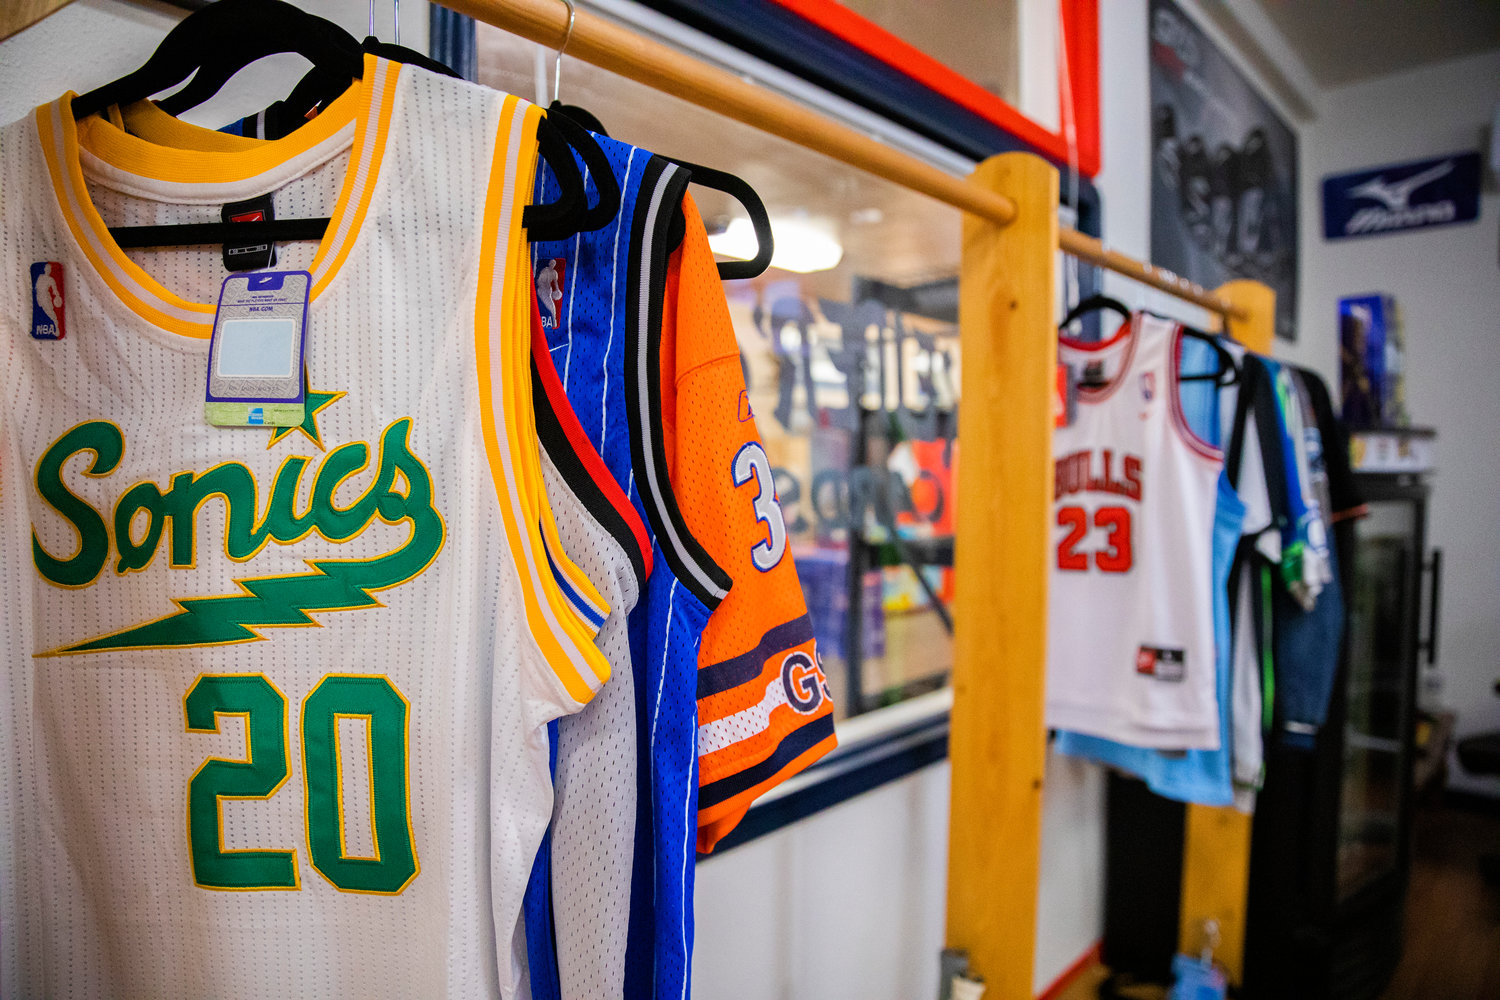 Jerseys hang on display inside Keiper’s Cards in downtown Centralia on Thursday.